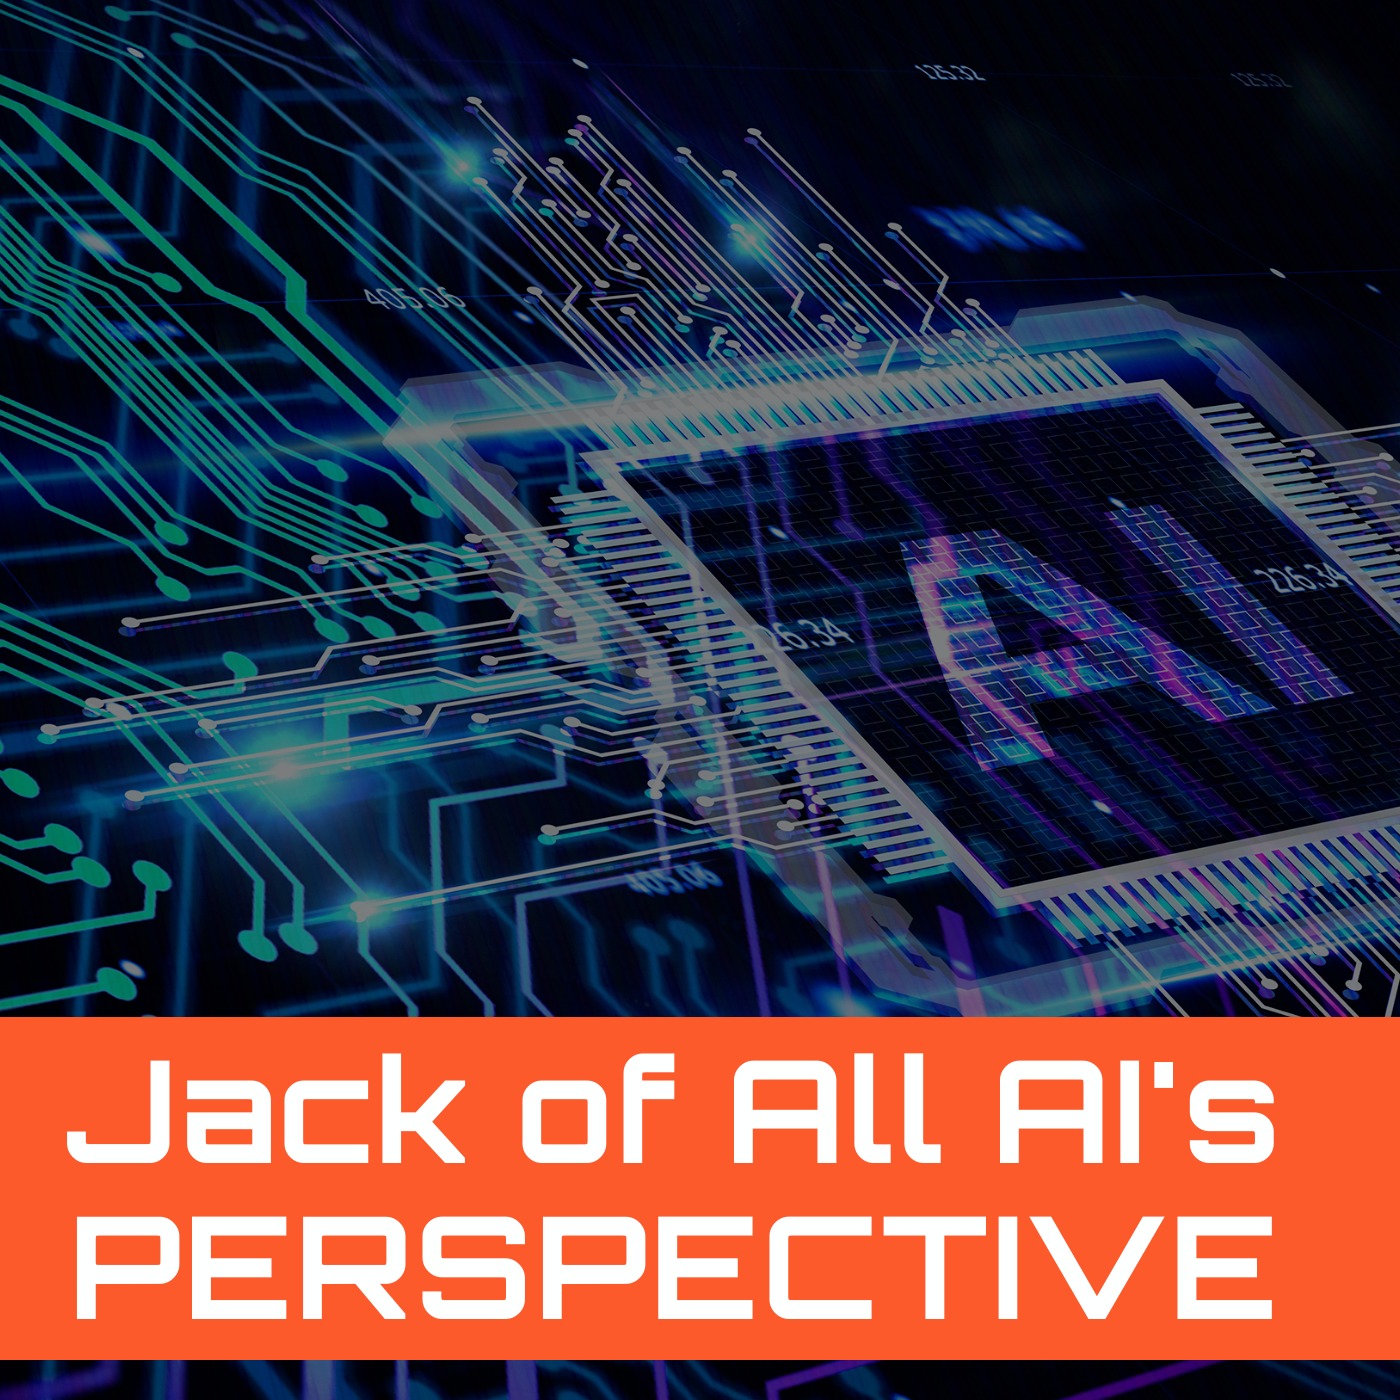 Jack of All AI's perspective